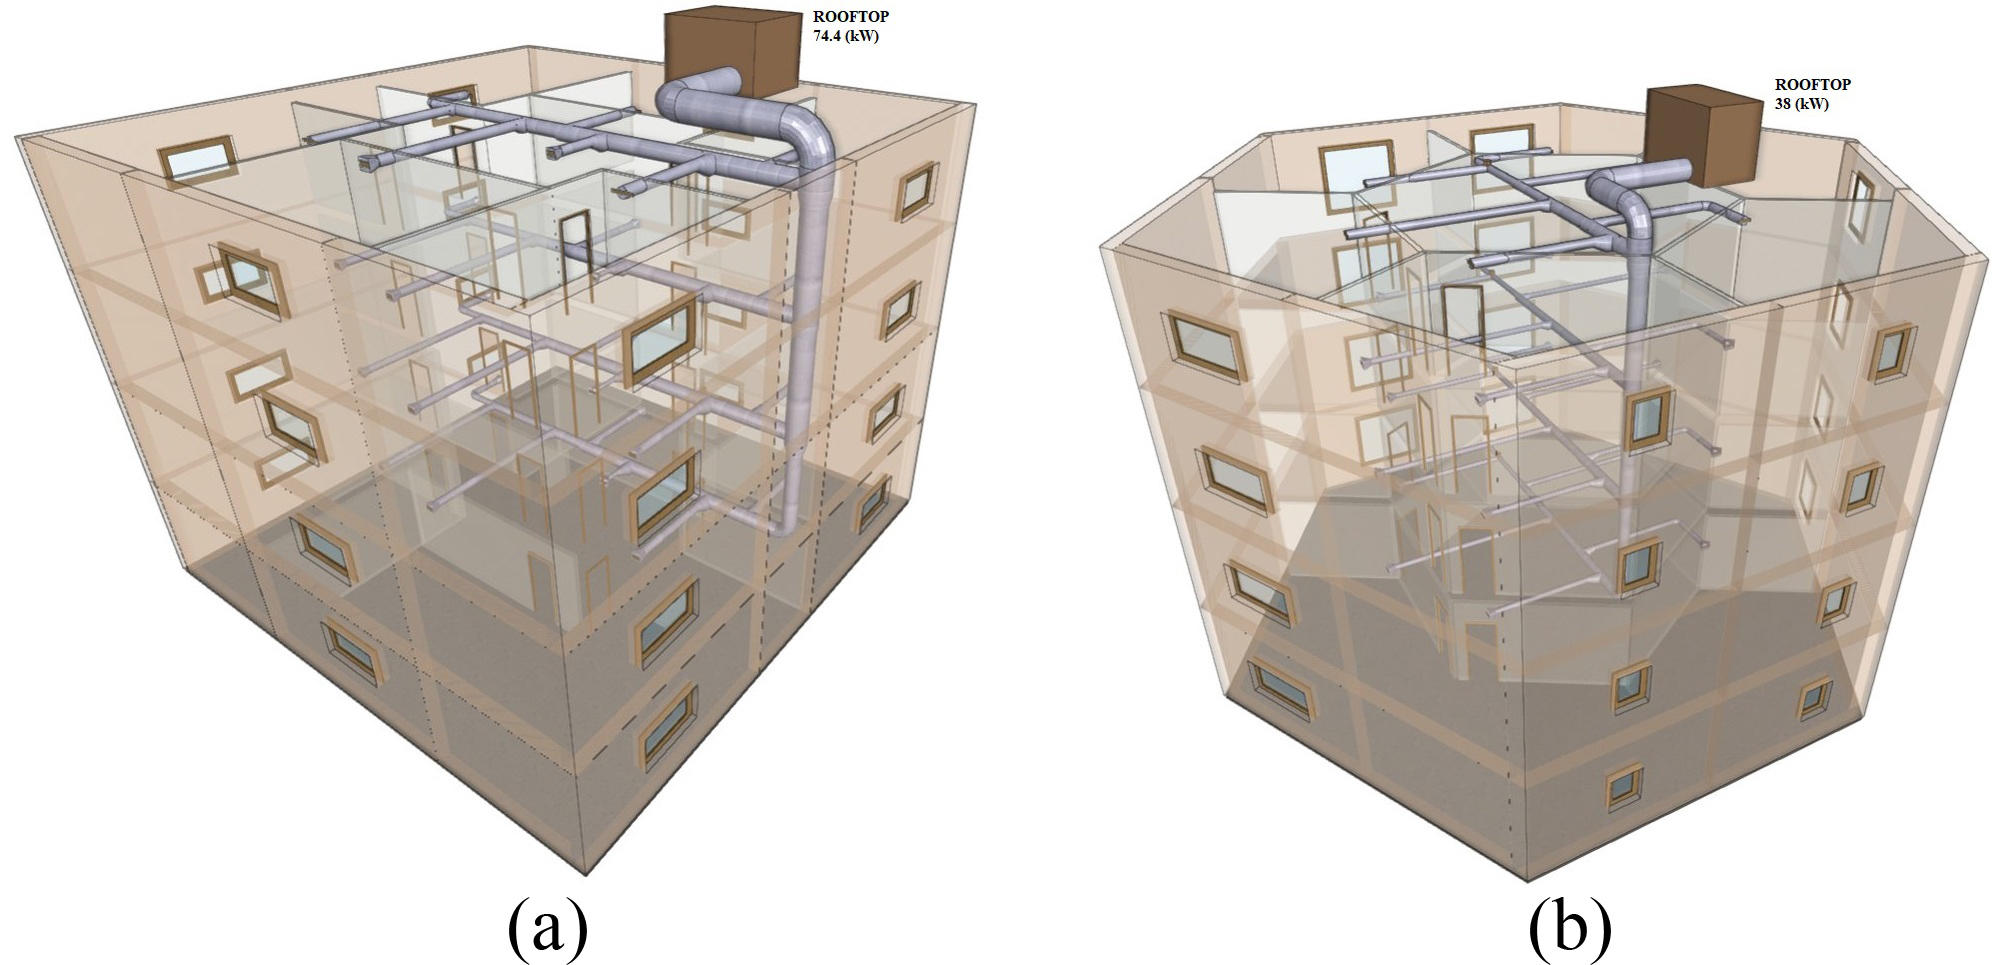 (a) 3D views of the HVAC system for the reference building model with 10% WWR (b) and the optimum building model.